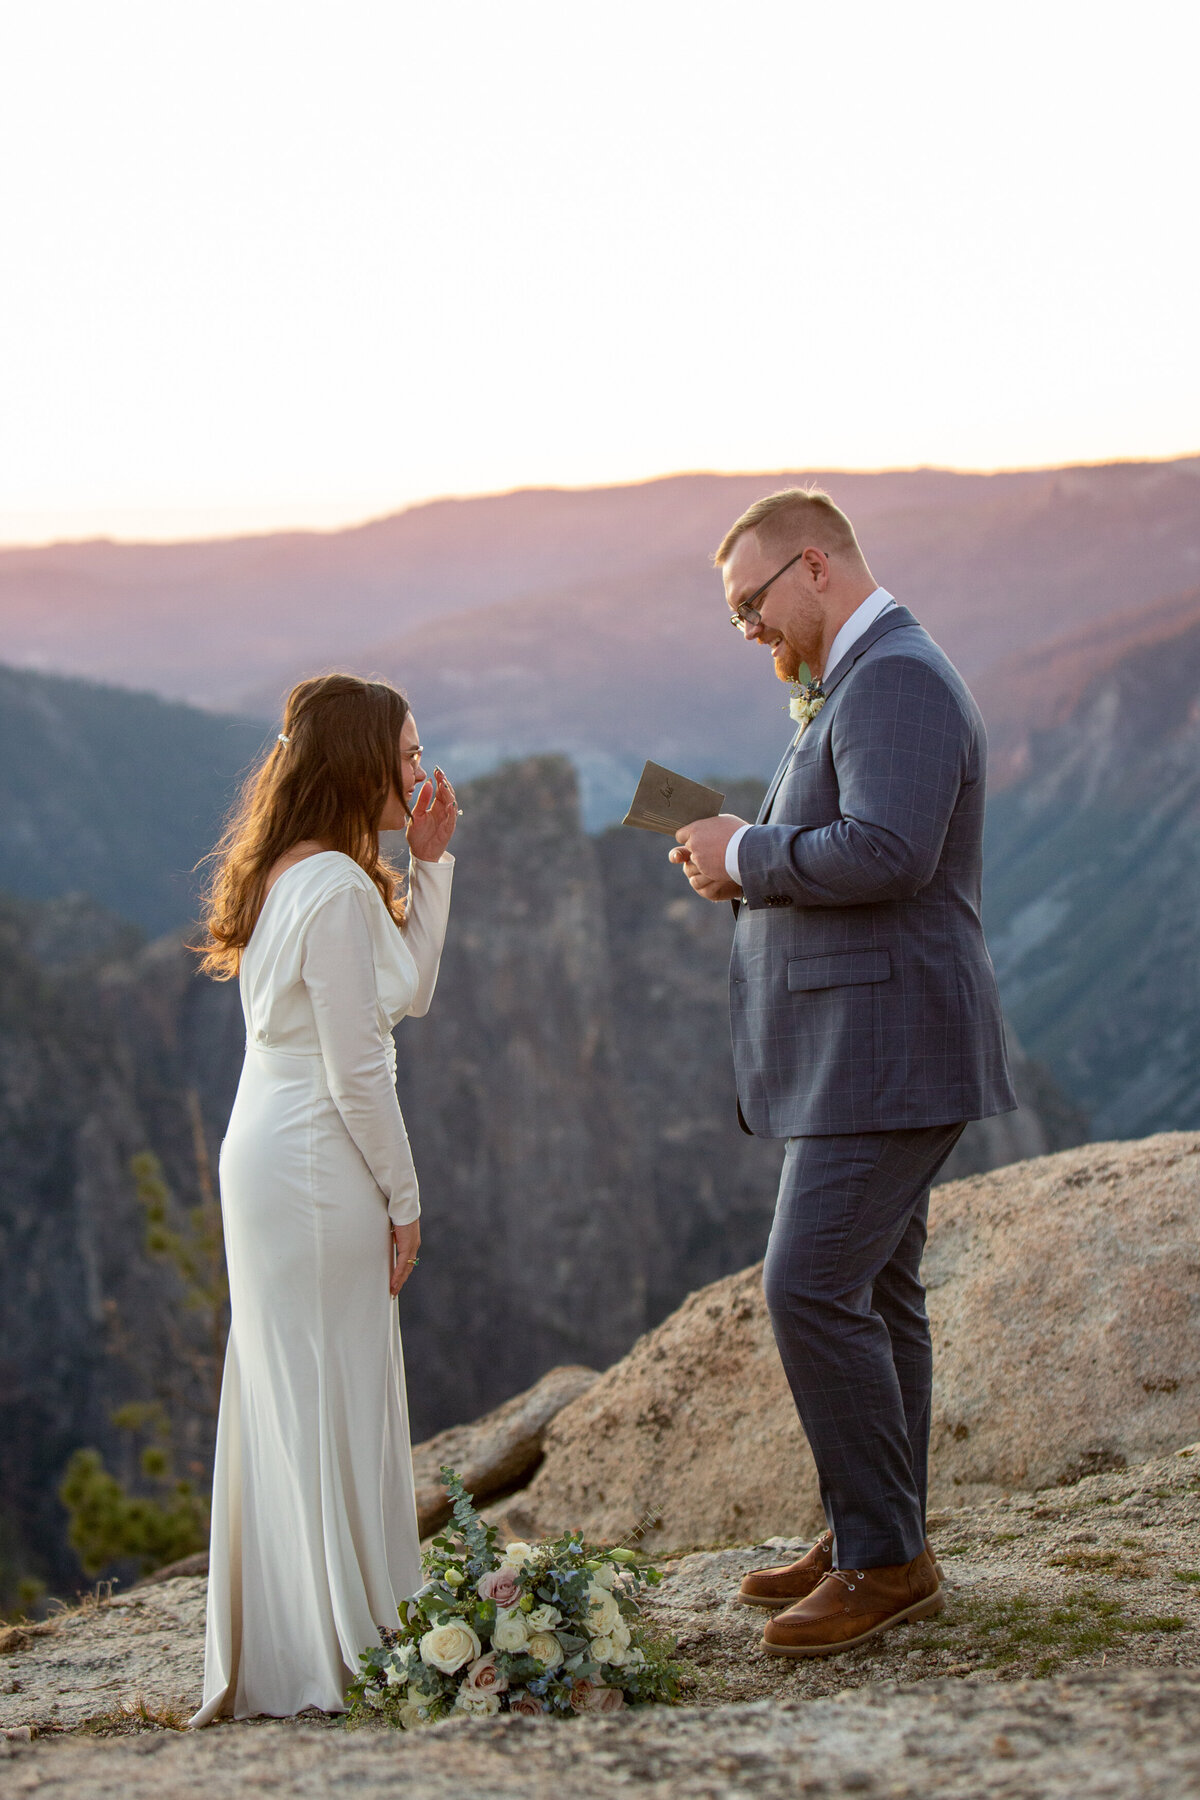 A bride stifles a laugh  as her groom reads his vows to her during their elopement ceremony in Yosemite.